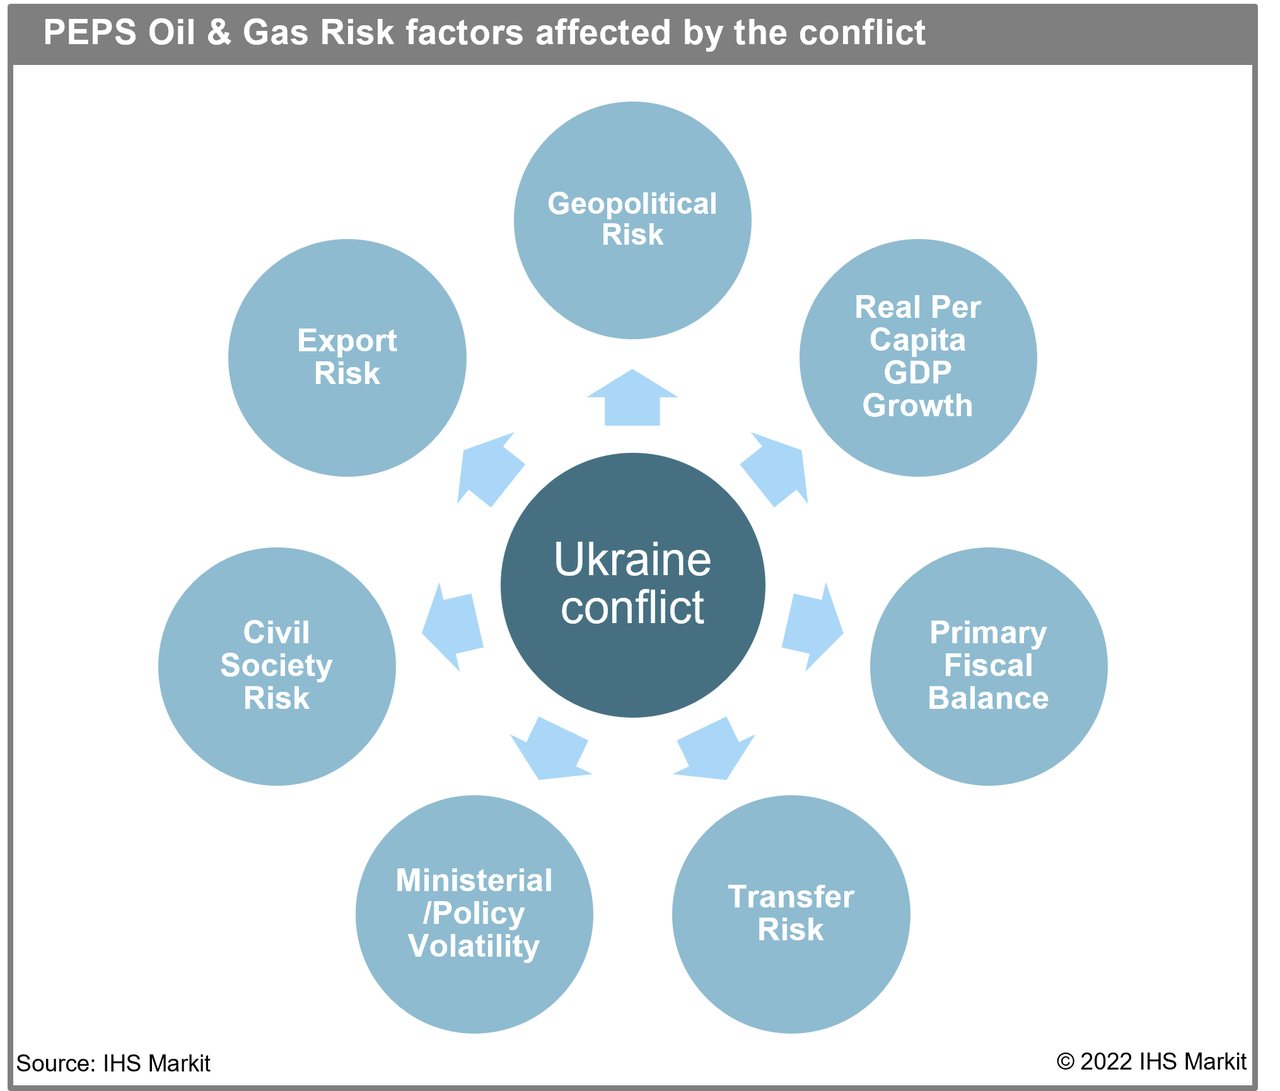 PEPS Oil & Gas risk factors affected by the conflict